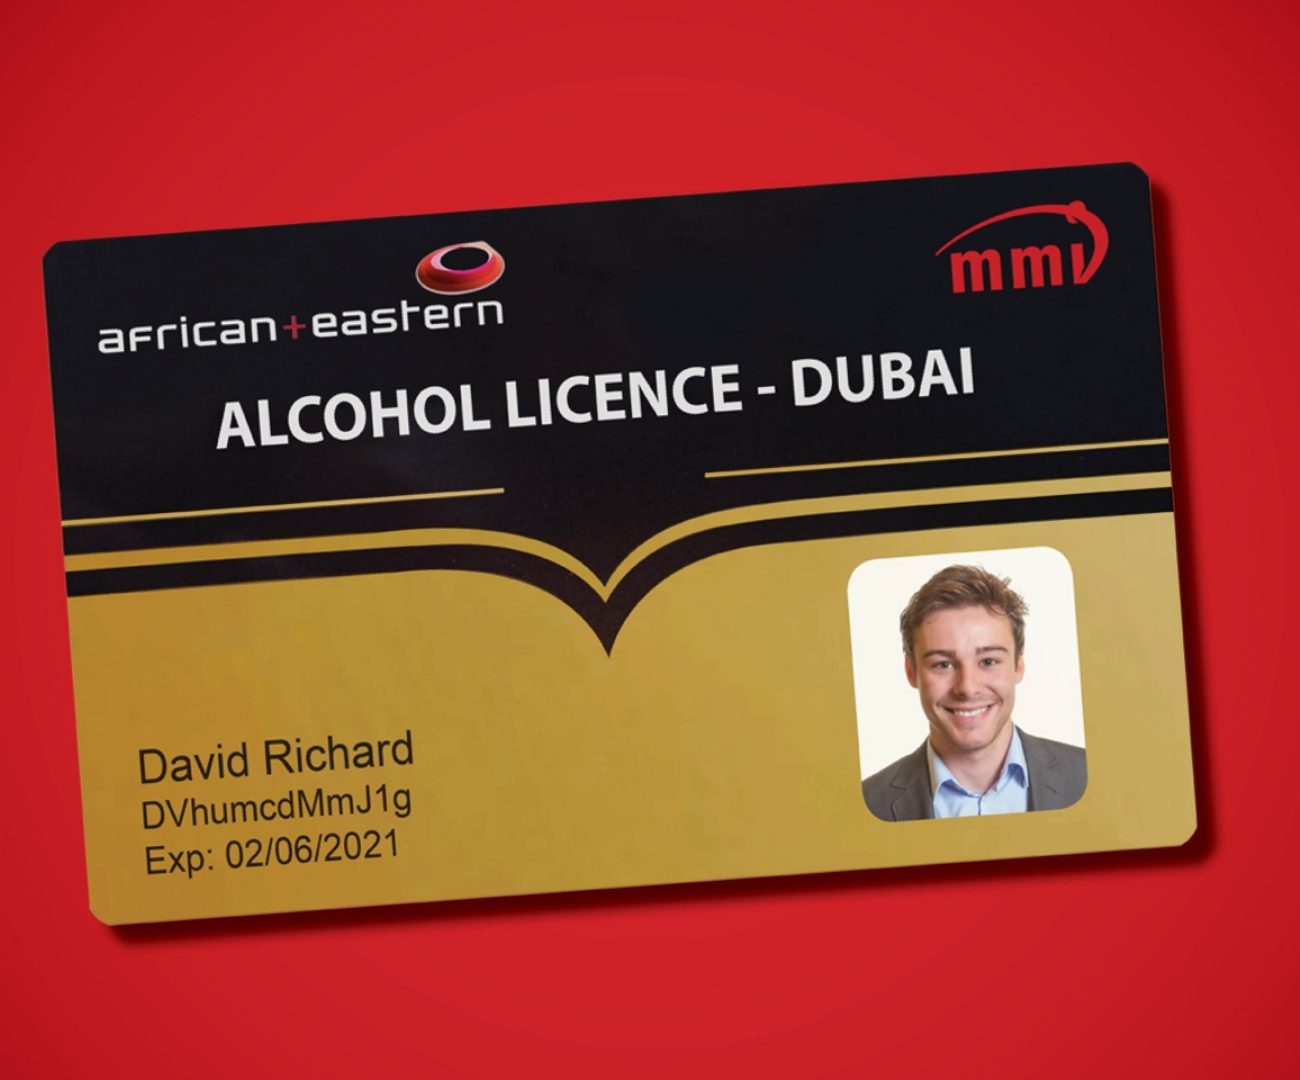 How to get an alcohol license in Dubai